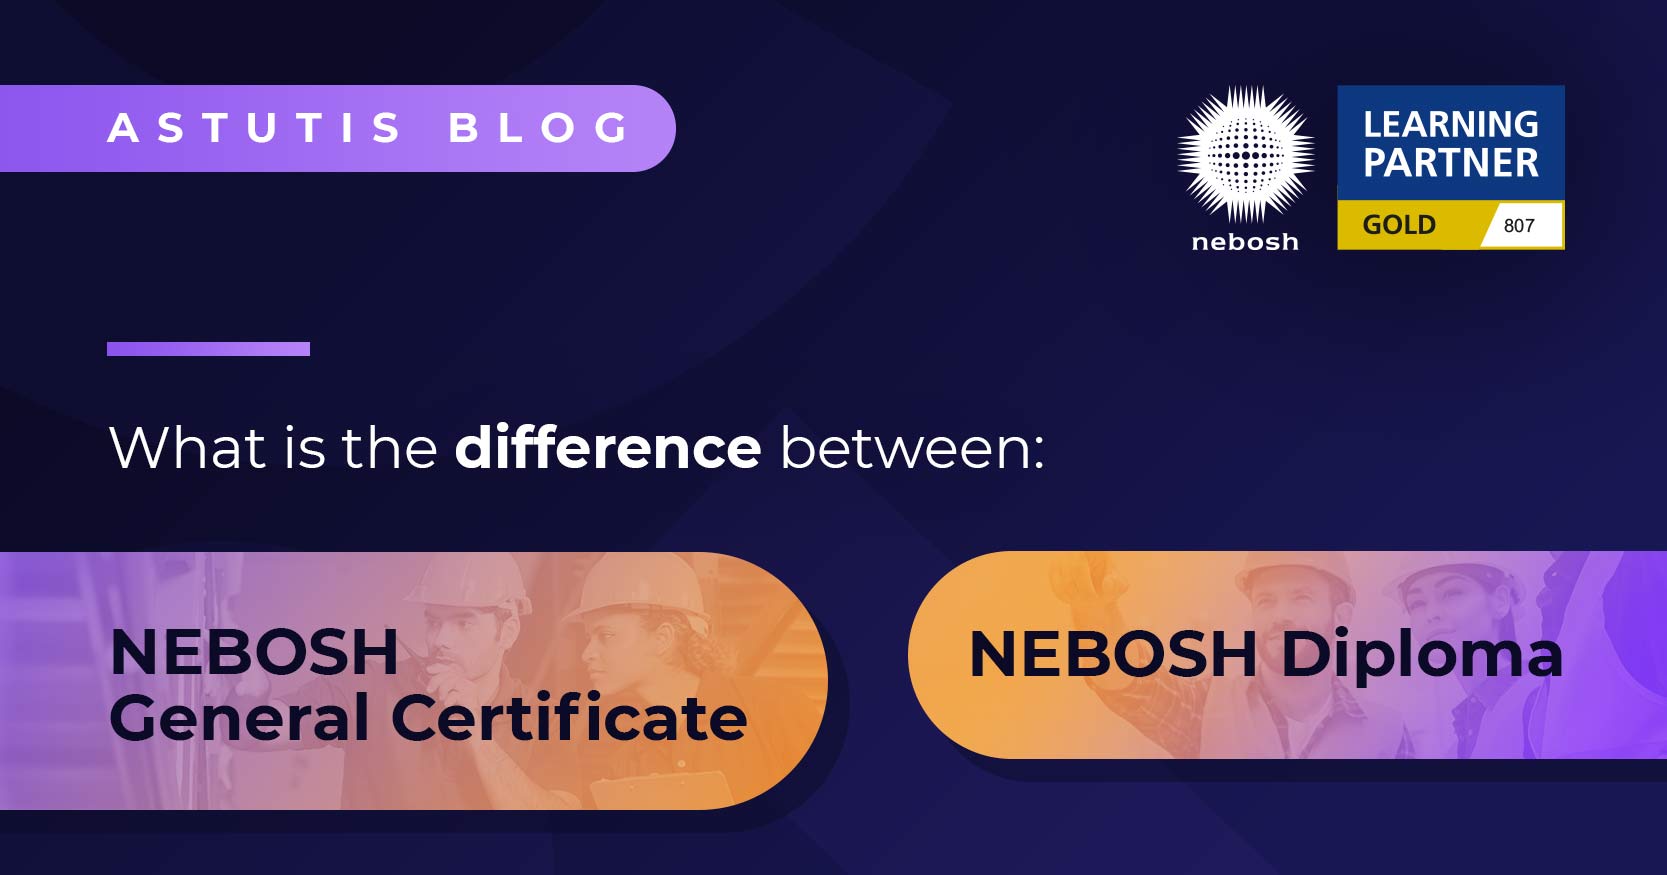 What is the difference between the NEBOSH Diploma and NEBOSH Certificate? Image